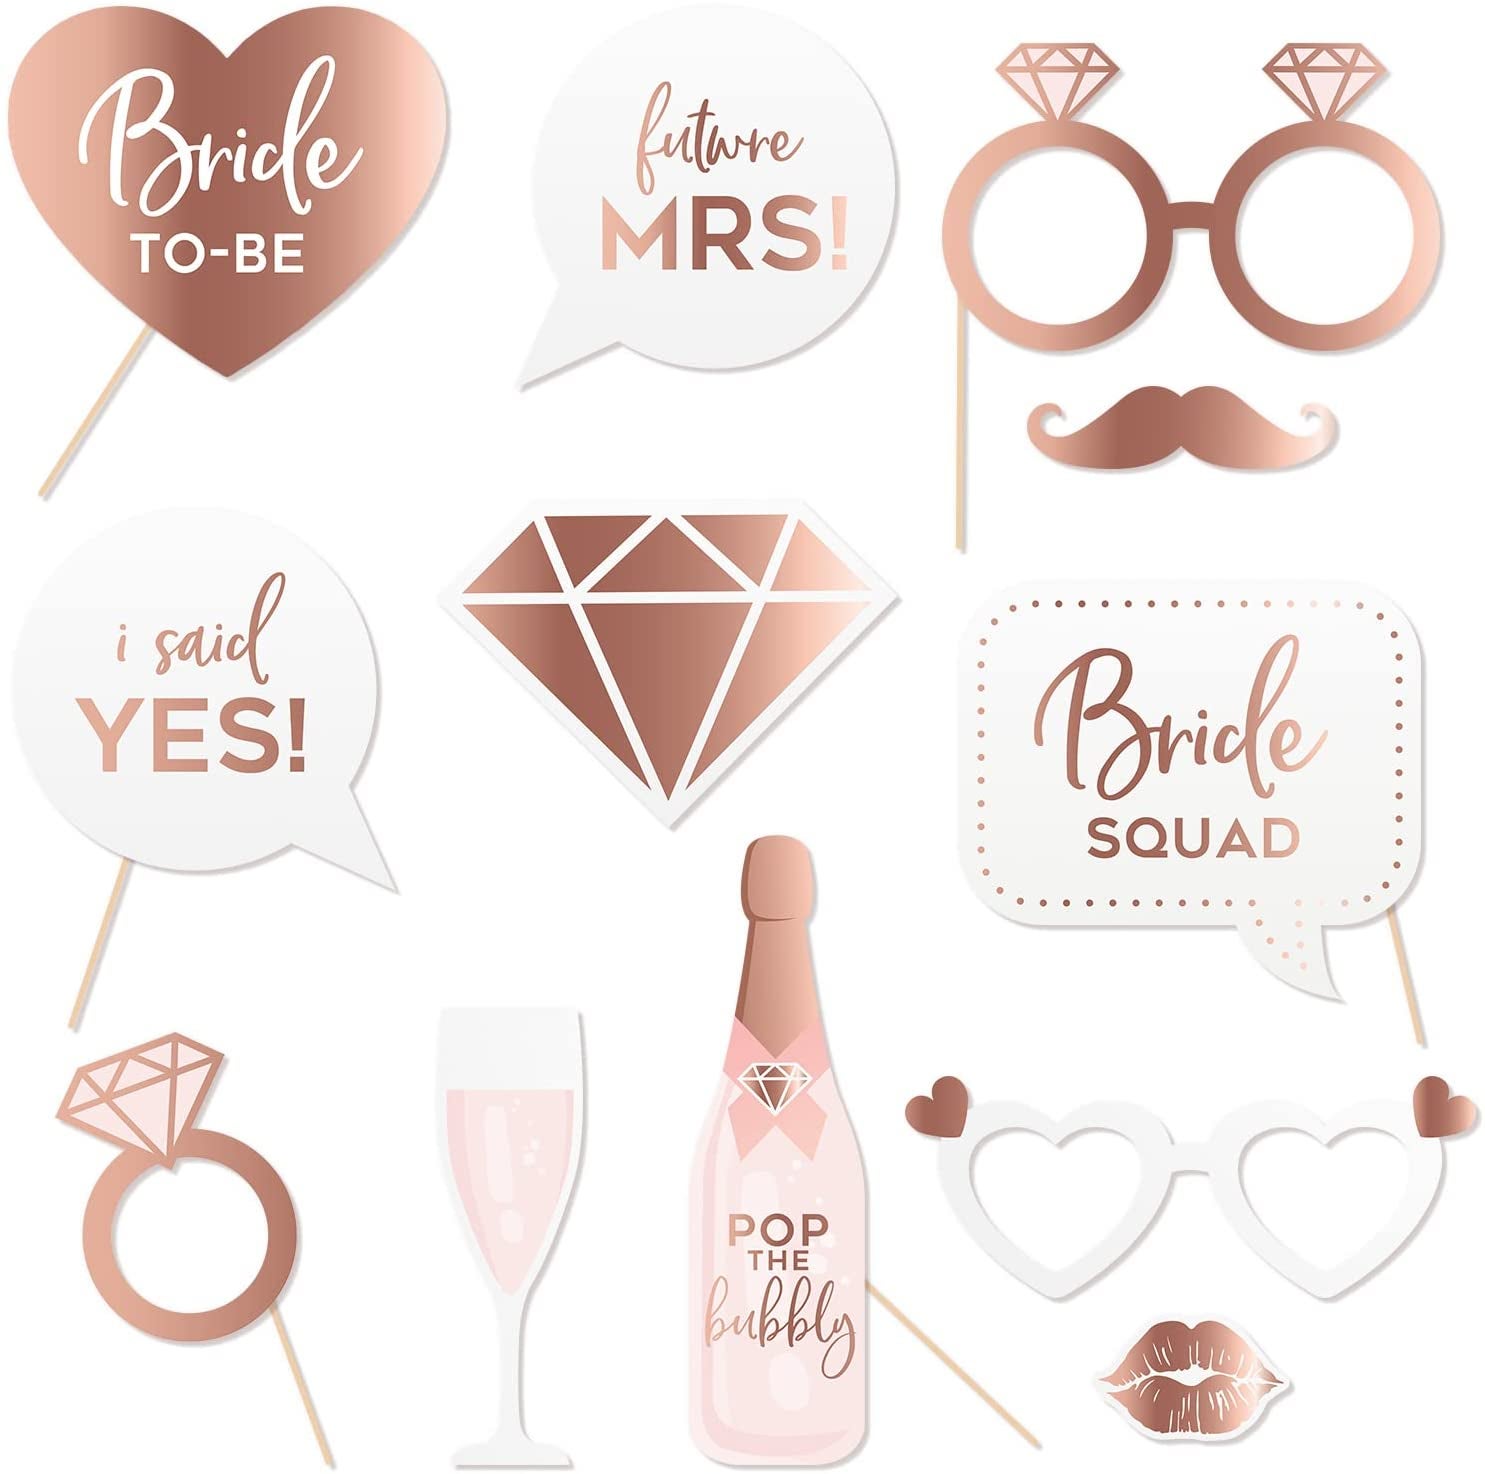 Diamond ring, champagne-shaped, champagne glass-shaped, diamond, glasses, and wedding-themed blurb photo booth props